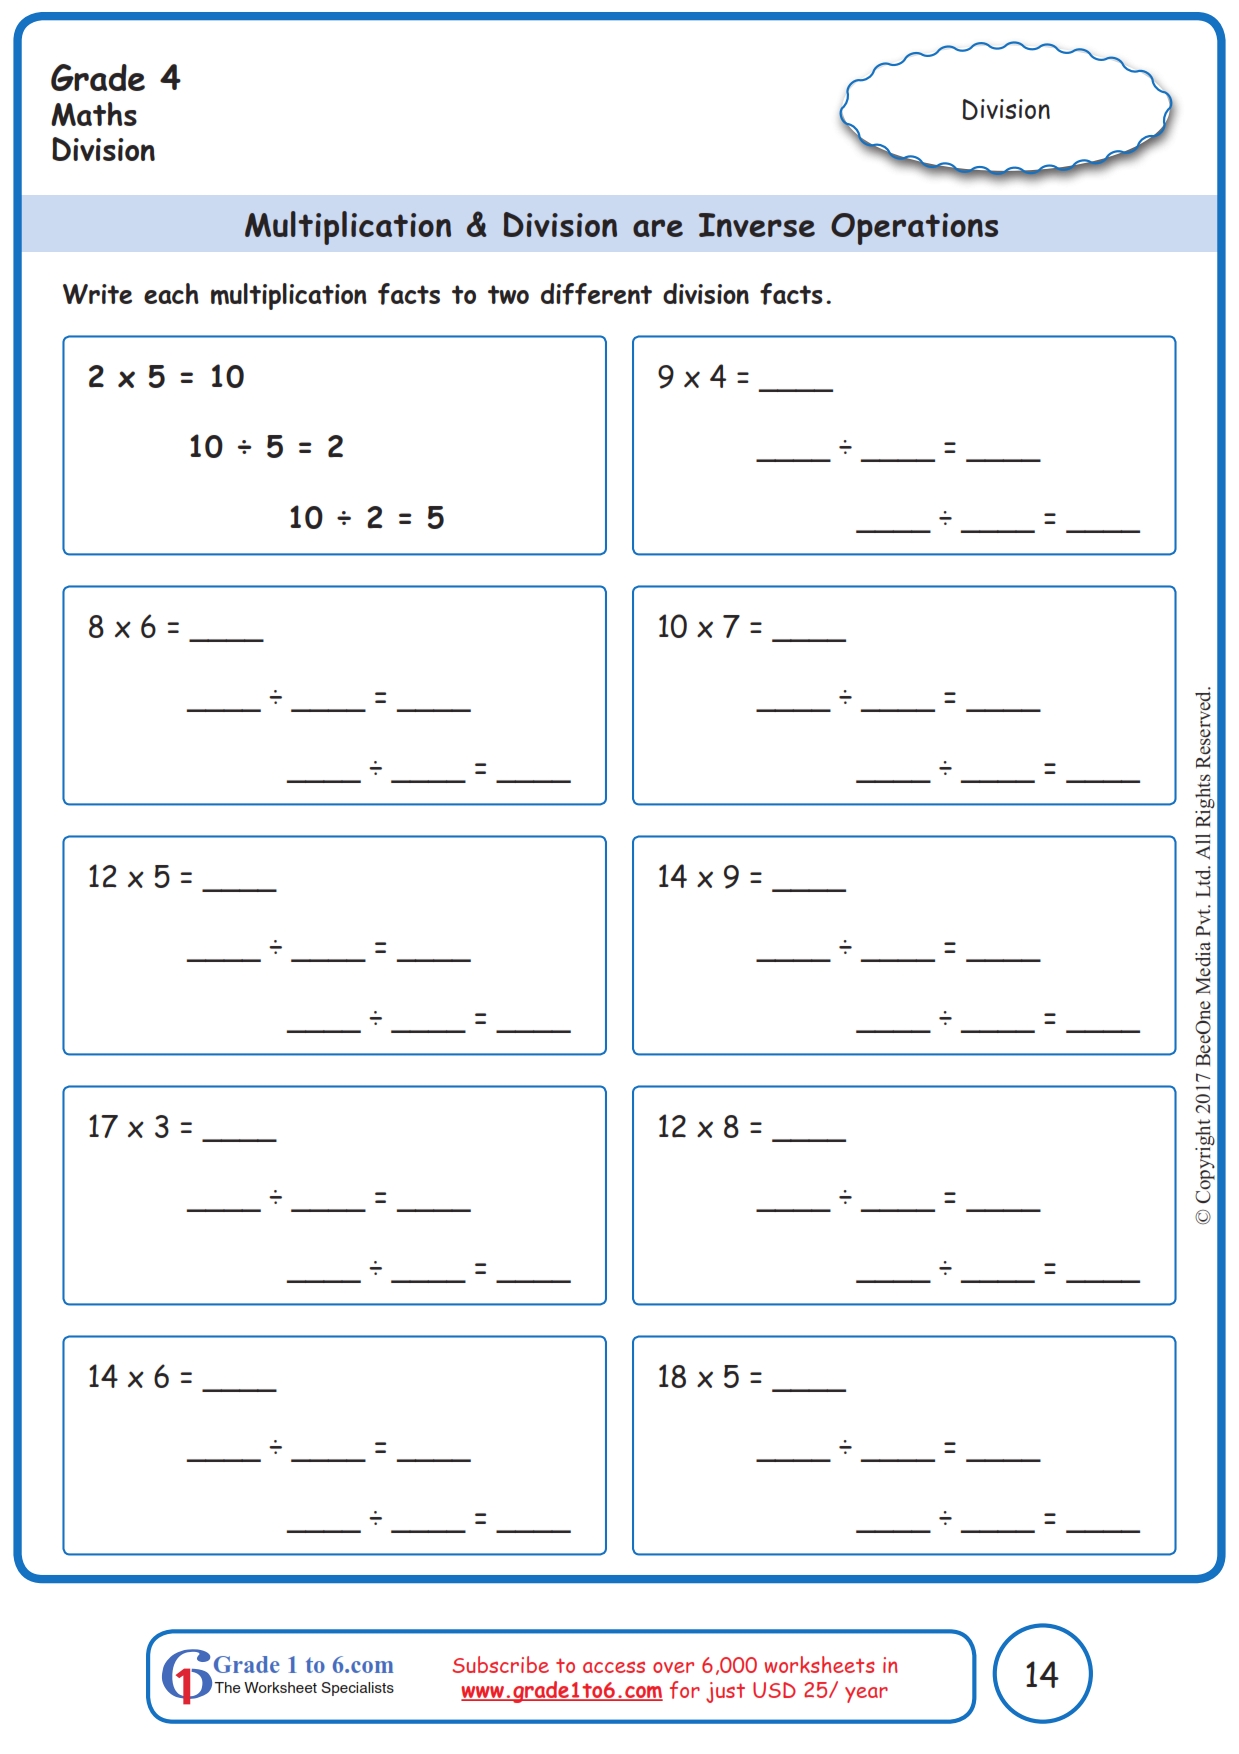 inverse-operations-worksheets